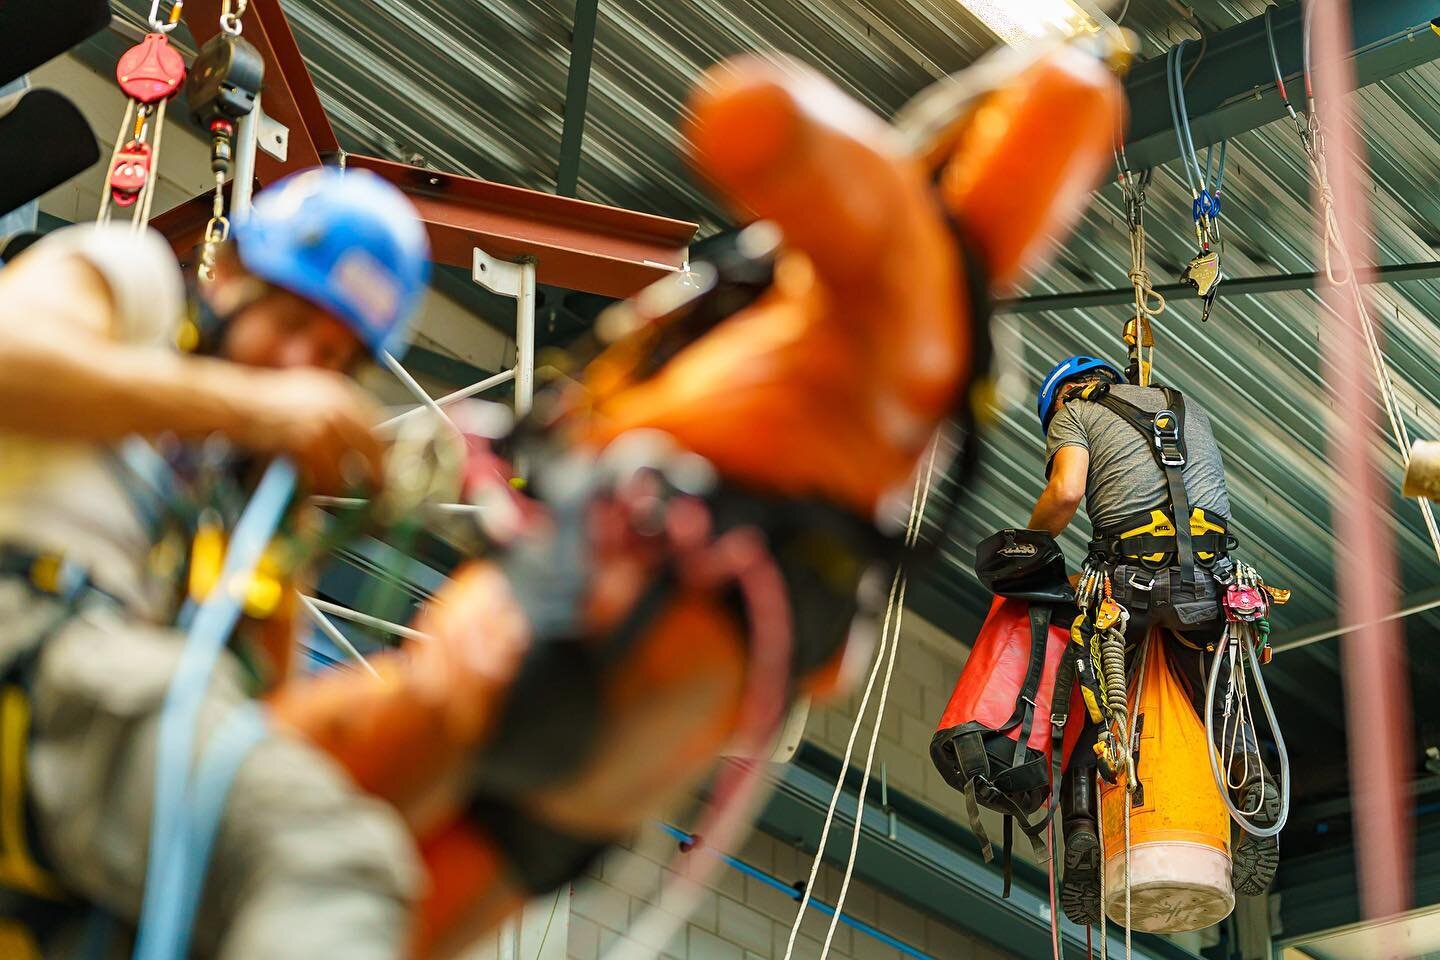 Hanging and hauling! 
Working hard during an @iratainternational reassessment course @industrieelklimmen.nl 

#ropeaccess #climbing #photography #irata #petzlprofessional